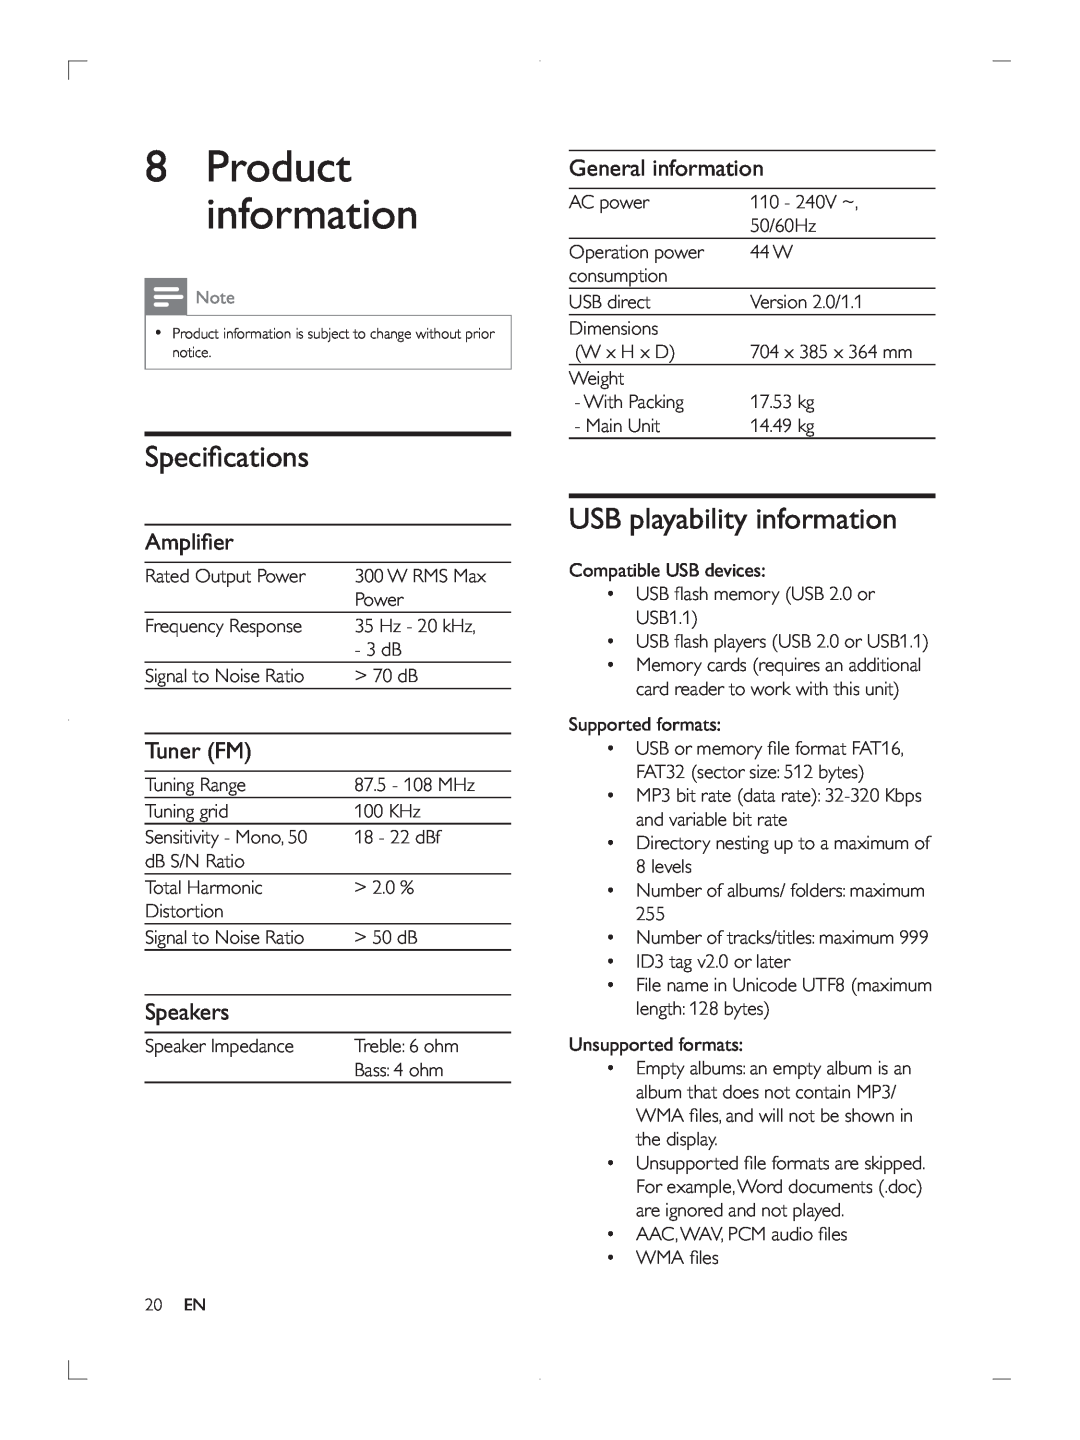 Philips FWP3200D user manual 8Product information, USB playability information, Speakers, General information 